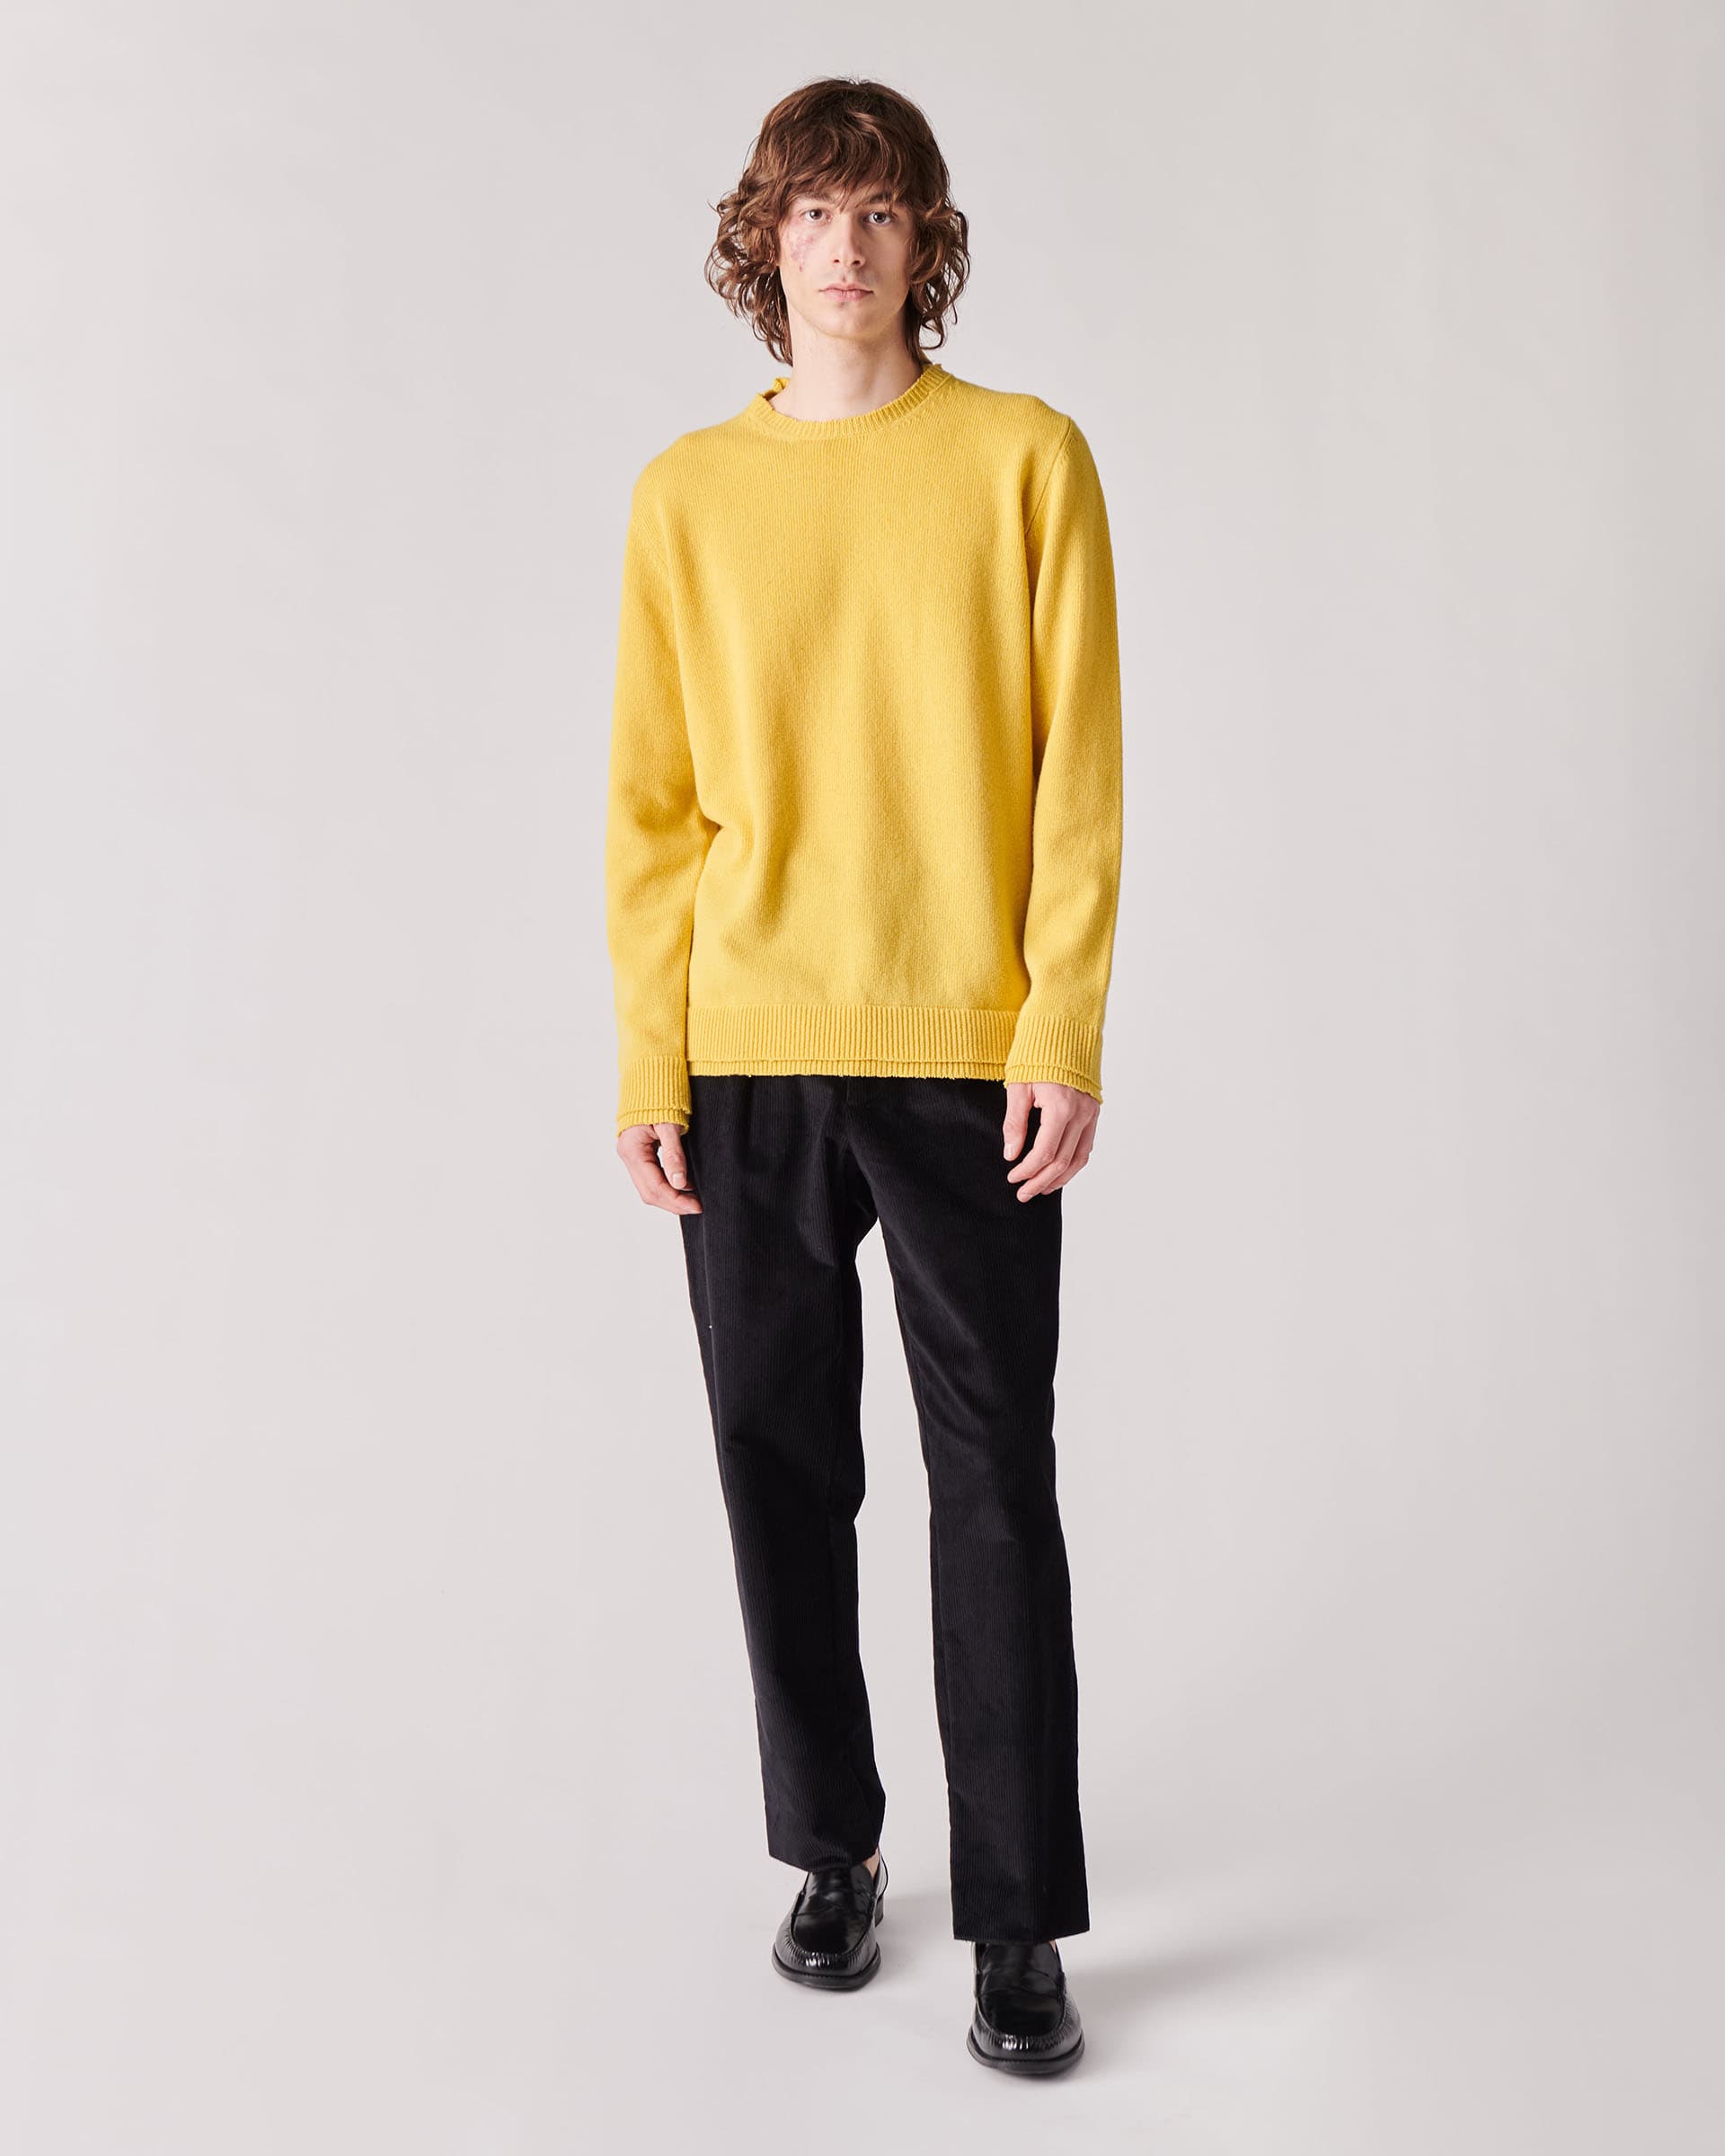 The Market Store | Crew Neck Sweater With Cut Bottoms